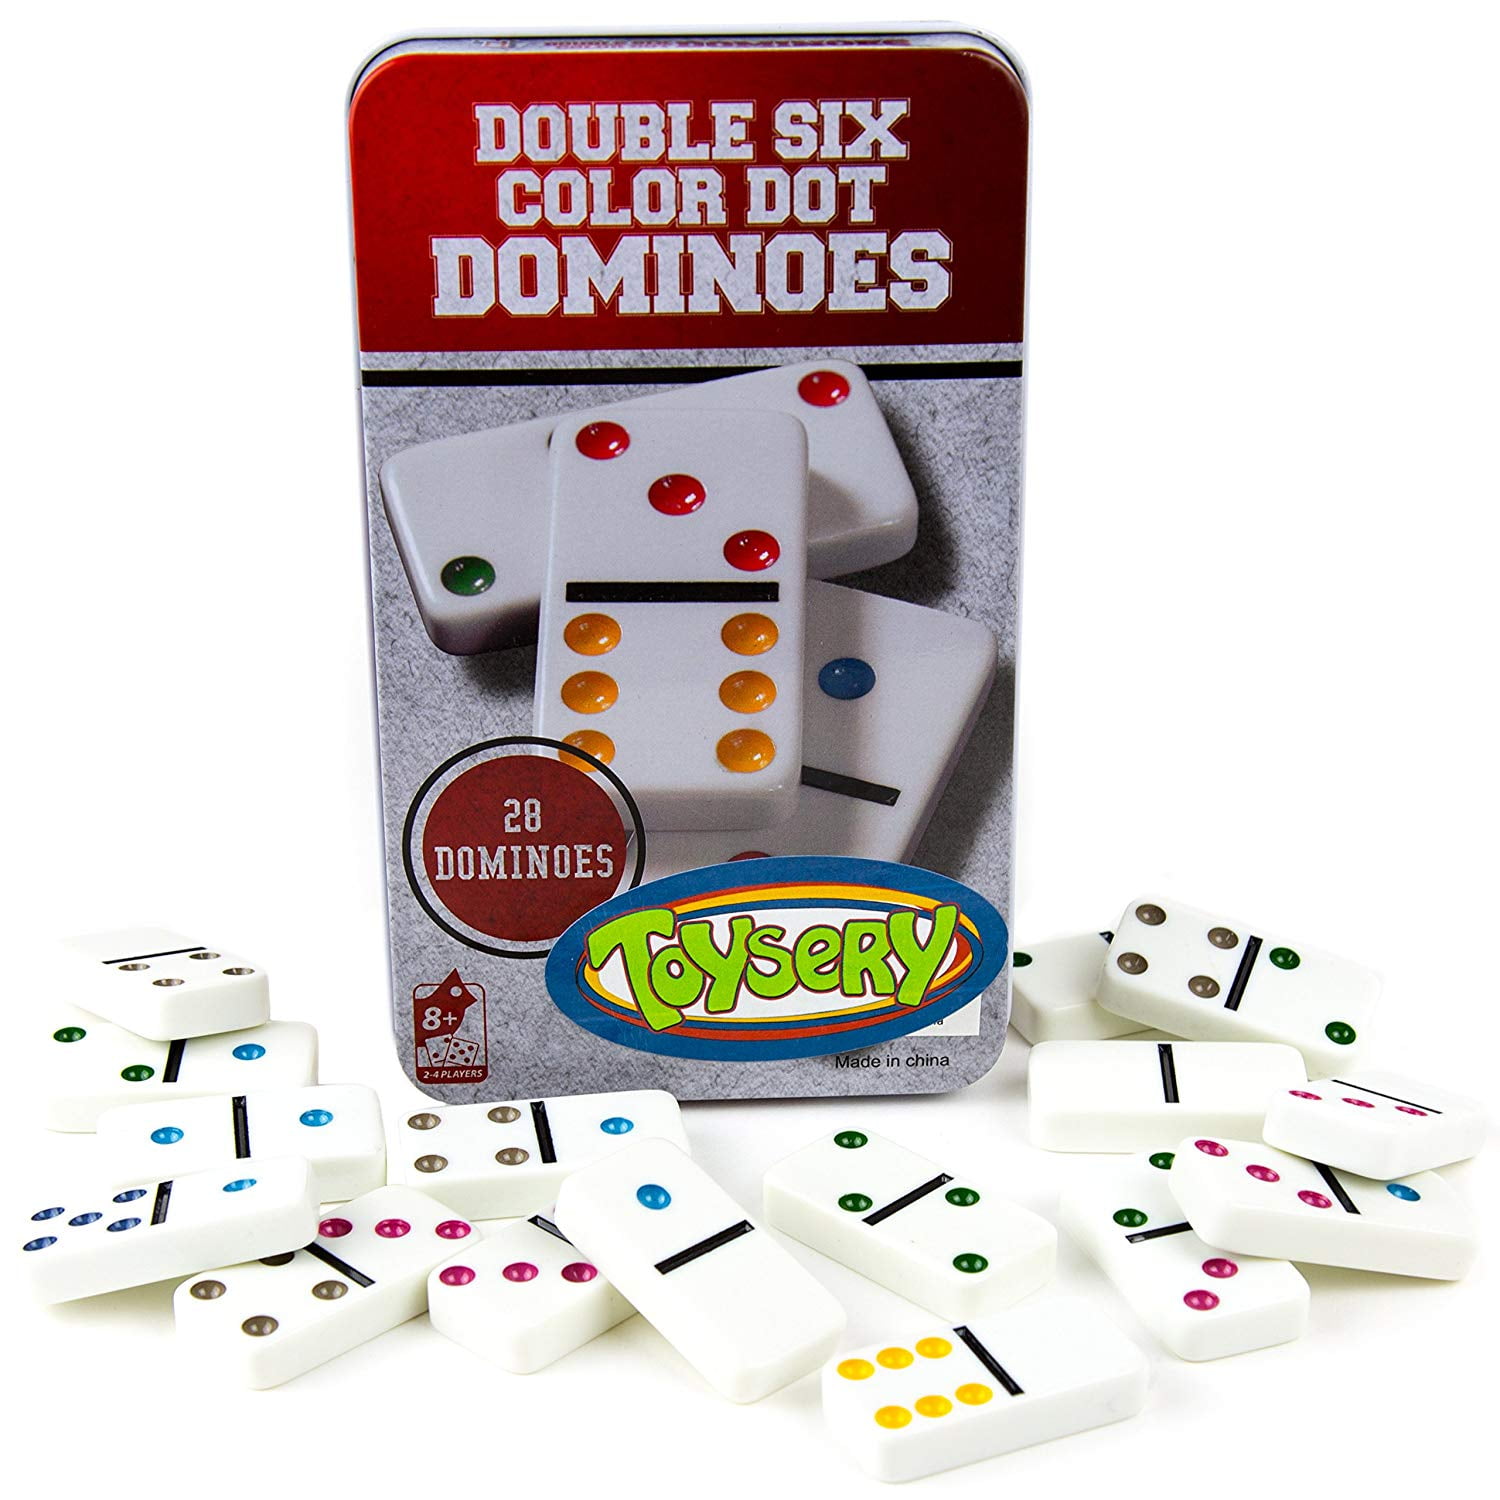 Double Six 6 Professional Dominoes Game Domino Tiles In Wooden Case Set 28 Piece 